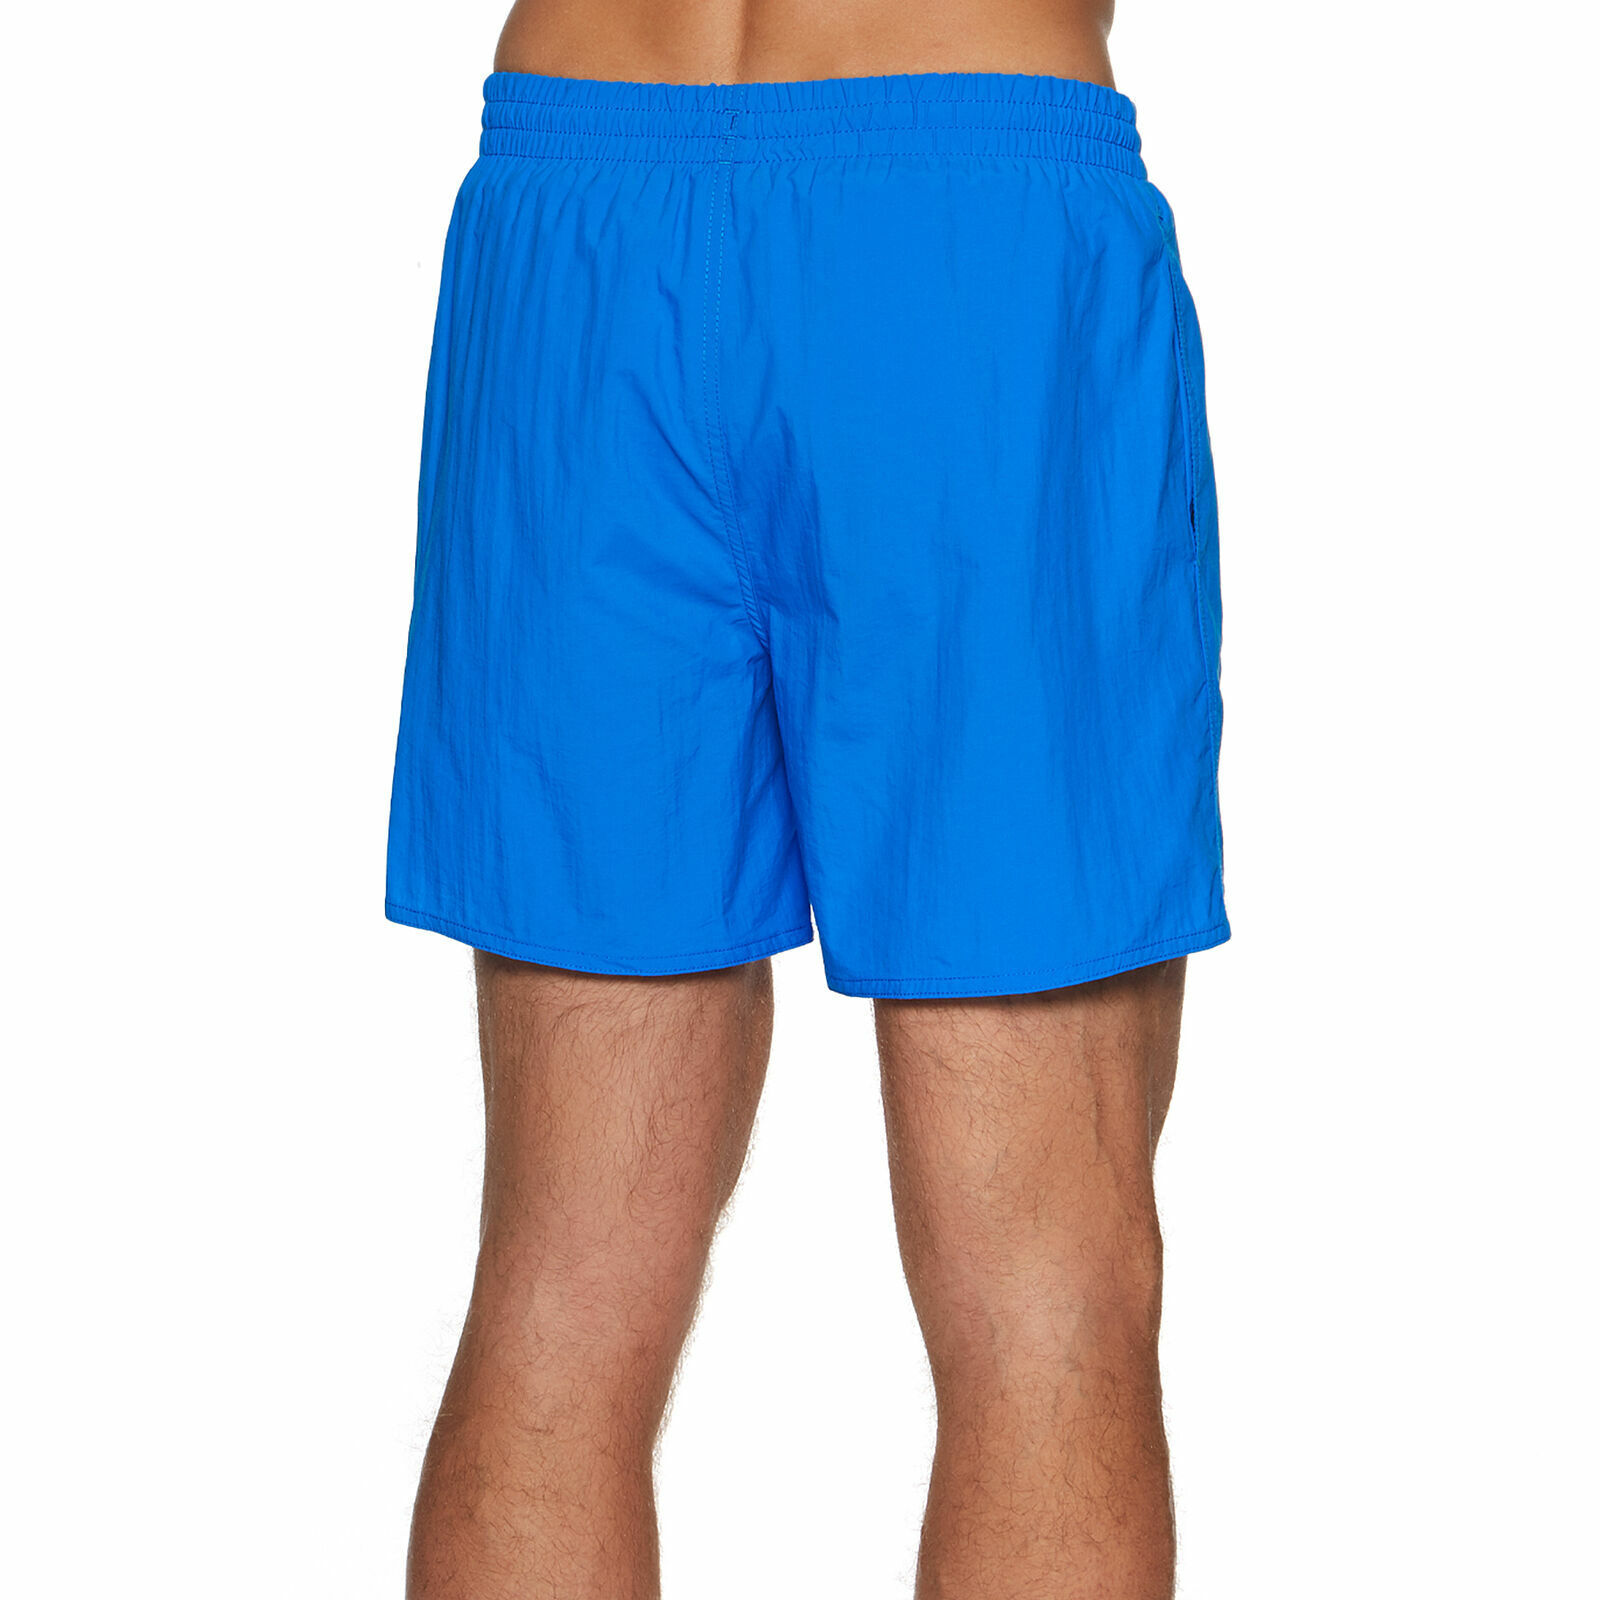 MENS SPEEDO SOLID ESSENTIAL SWIMMING SHORTS TRUNKS COBALT BLUE HOLIDAY ...